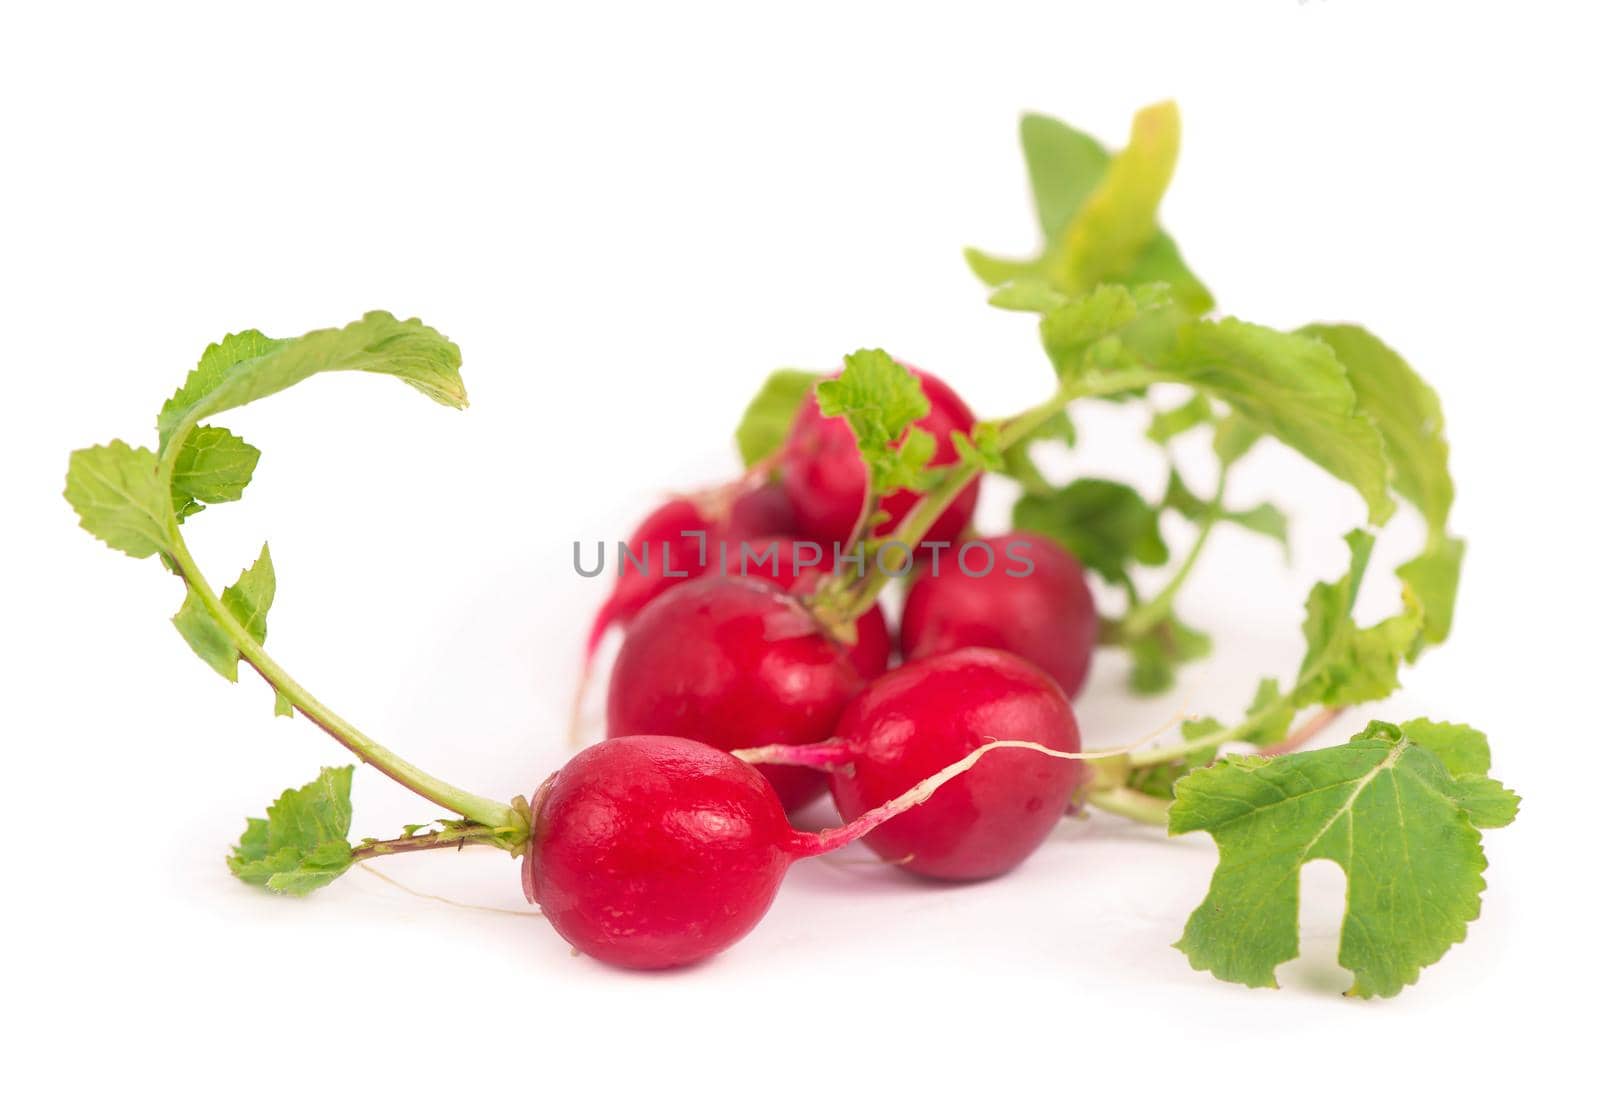 Radis bunch isolated on white background. Fresh radish root bundle, pile of red radishes with green leaves